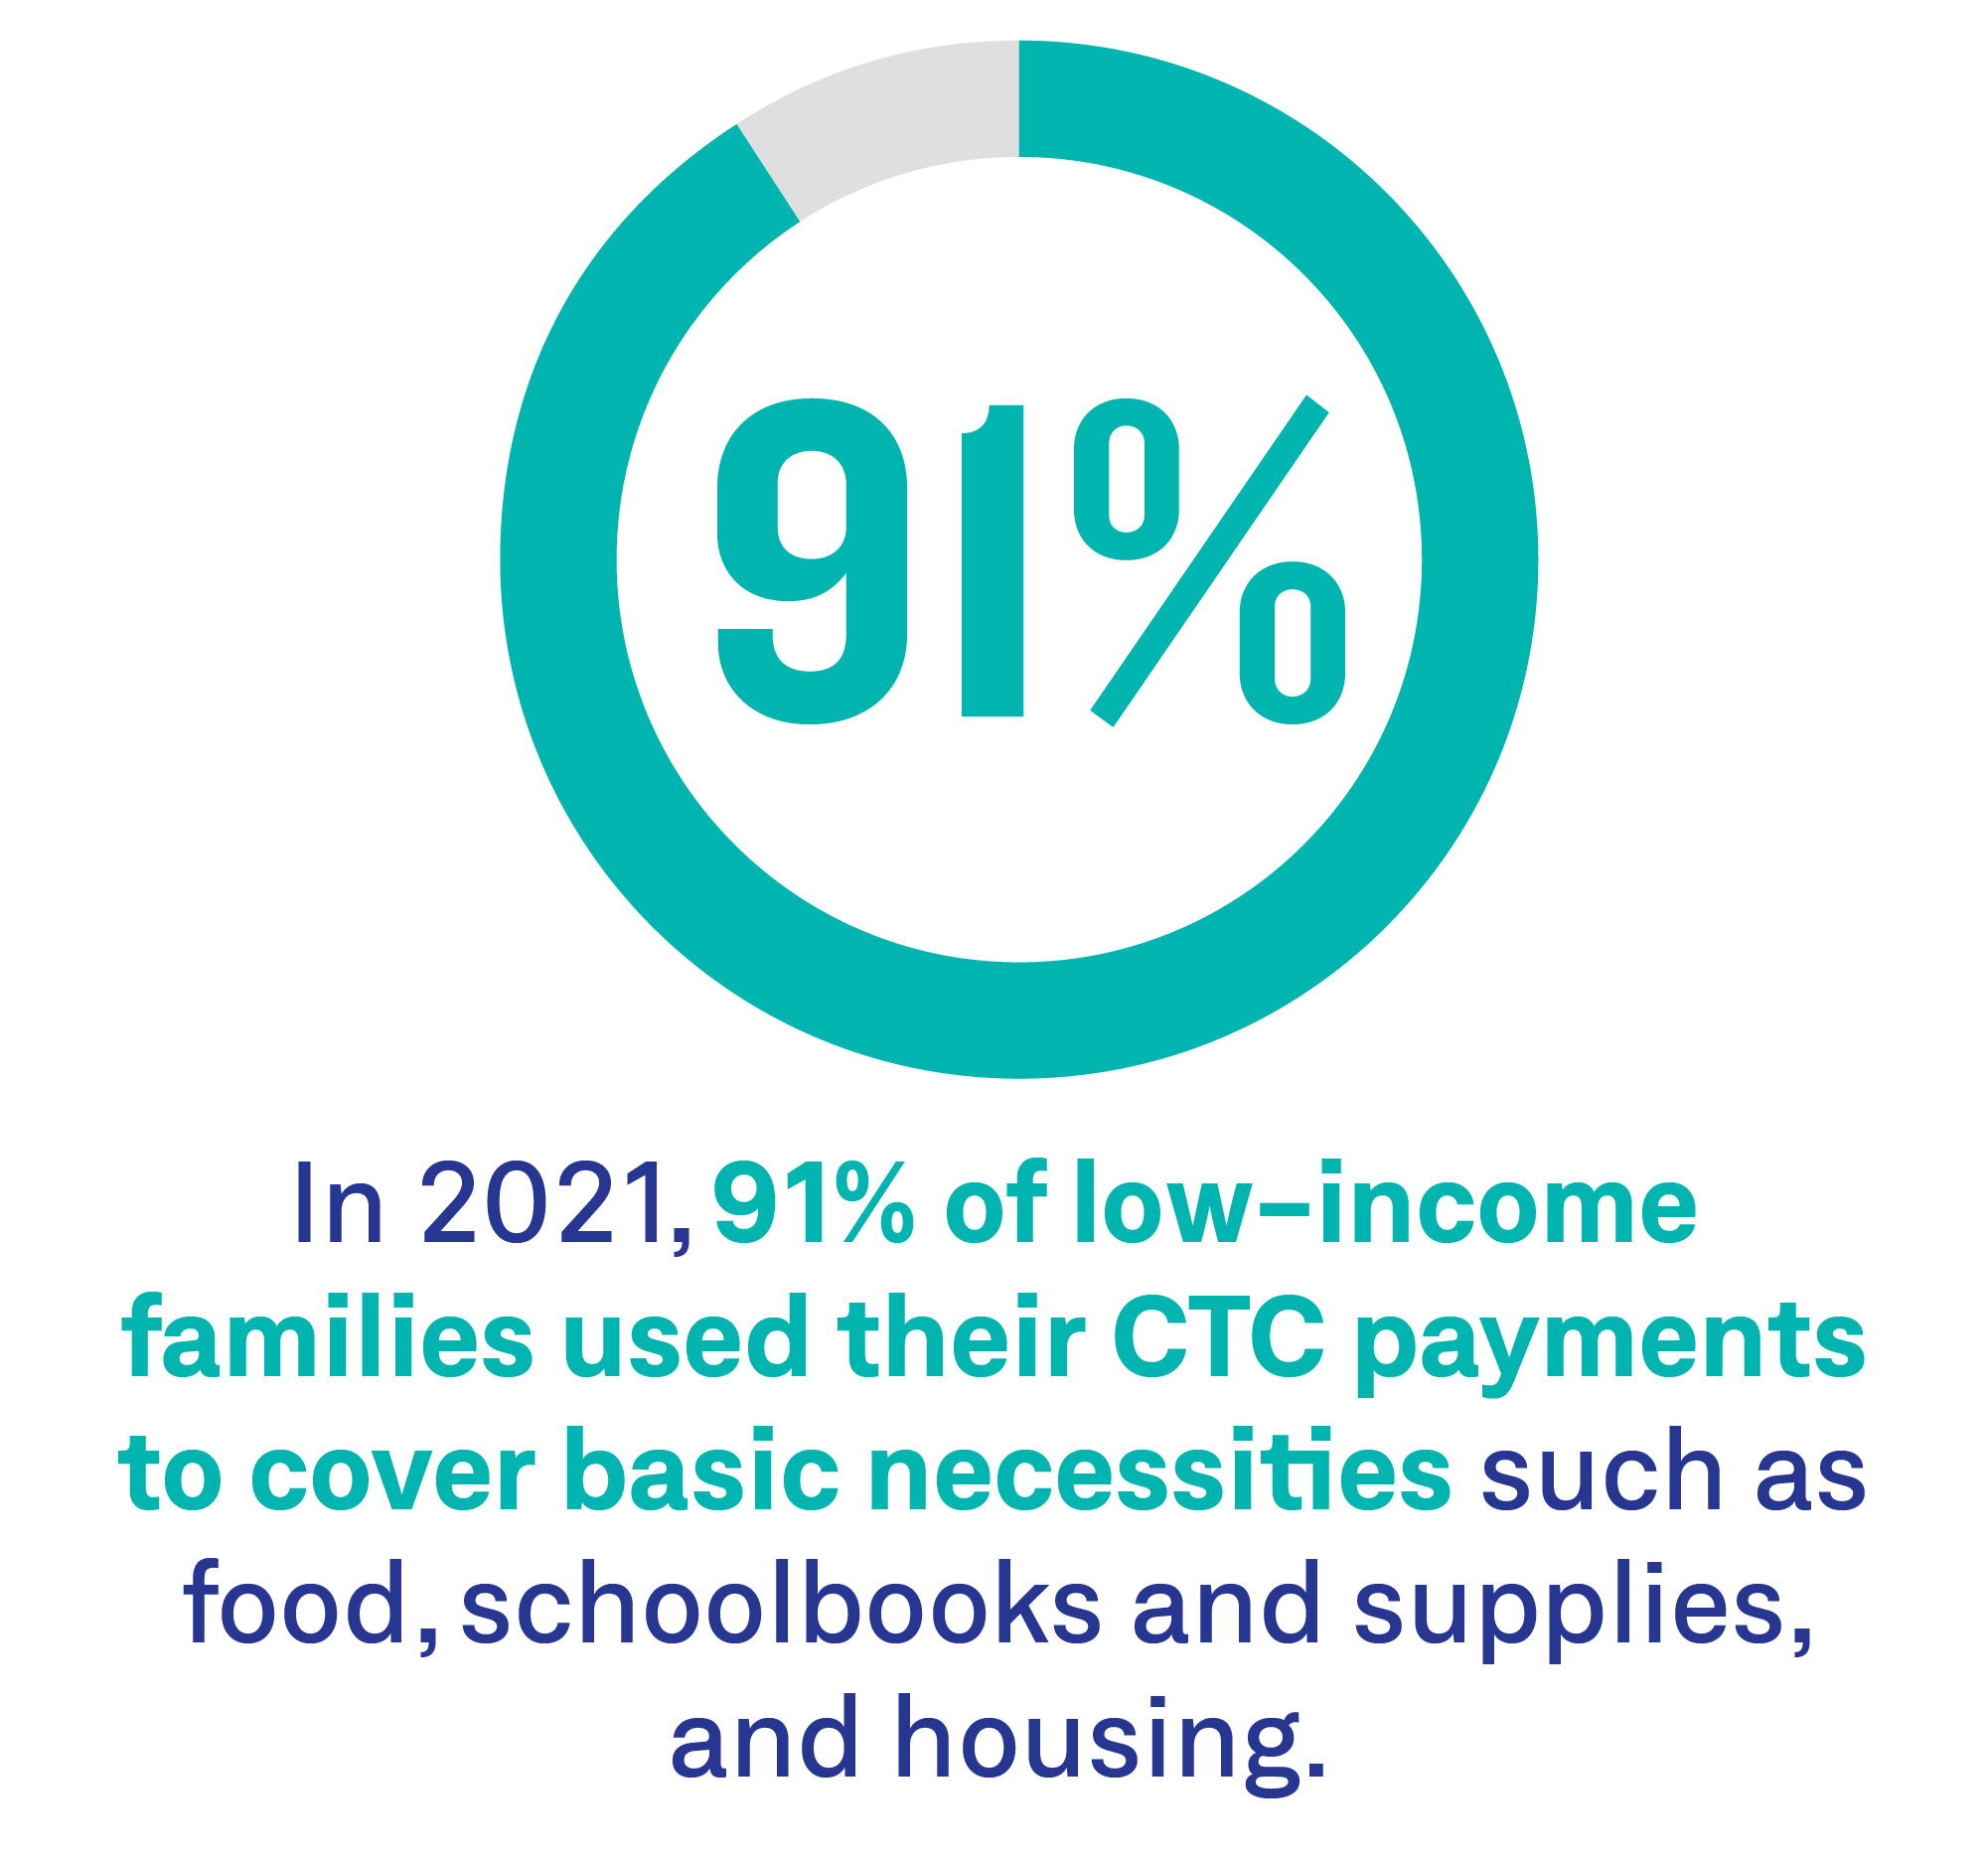 In 2021, 91% of low-income families used their CTC payments to cover basic necessities such as food, schoolbooks and supplies, and housing